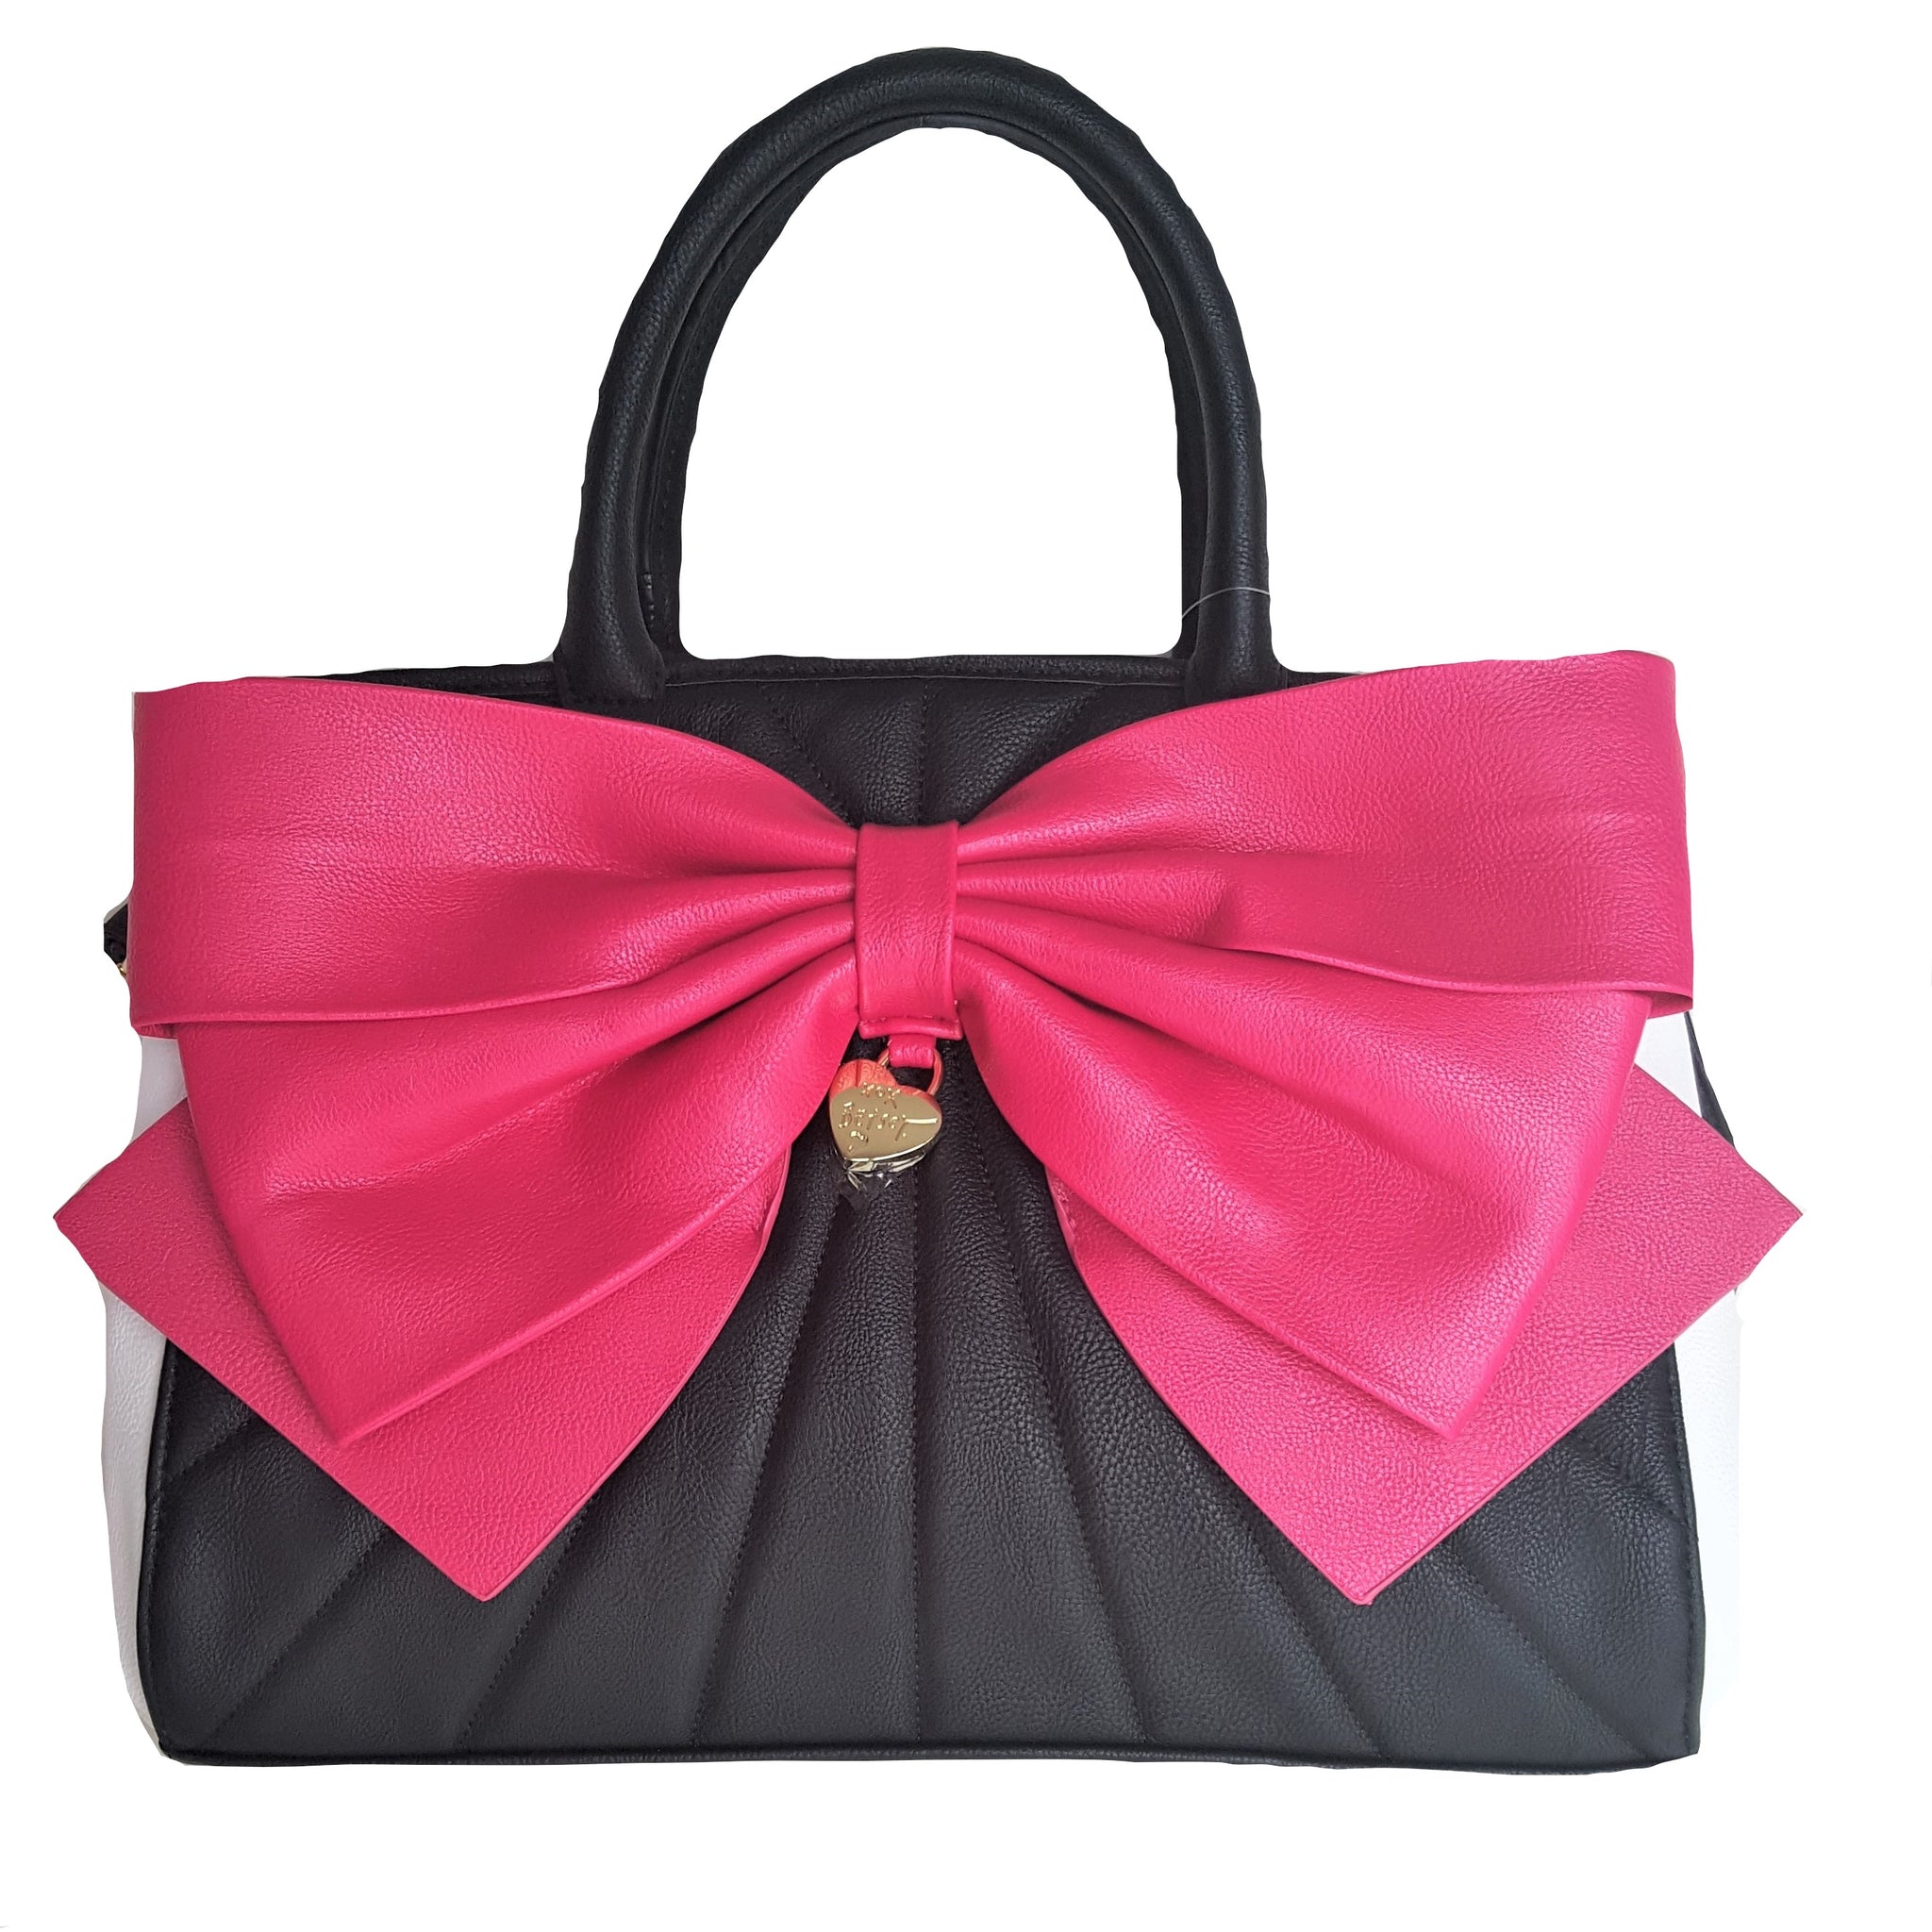 Best Deals for Betsey Johnson Bow